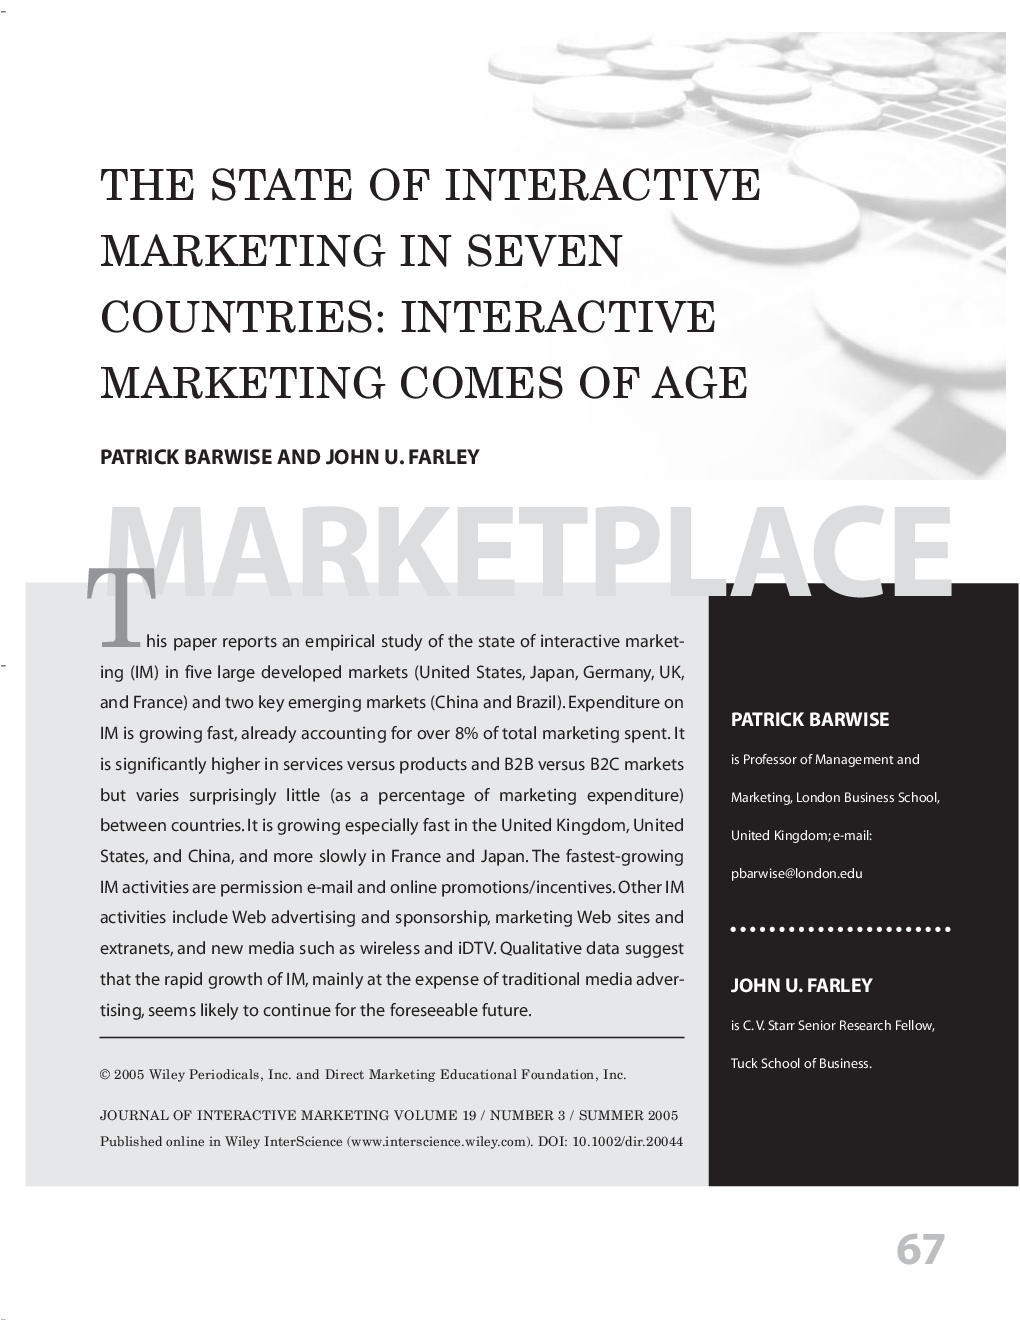 The state of interactive marketing in seven countries: Interactive marketing comes of age